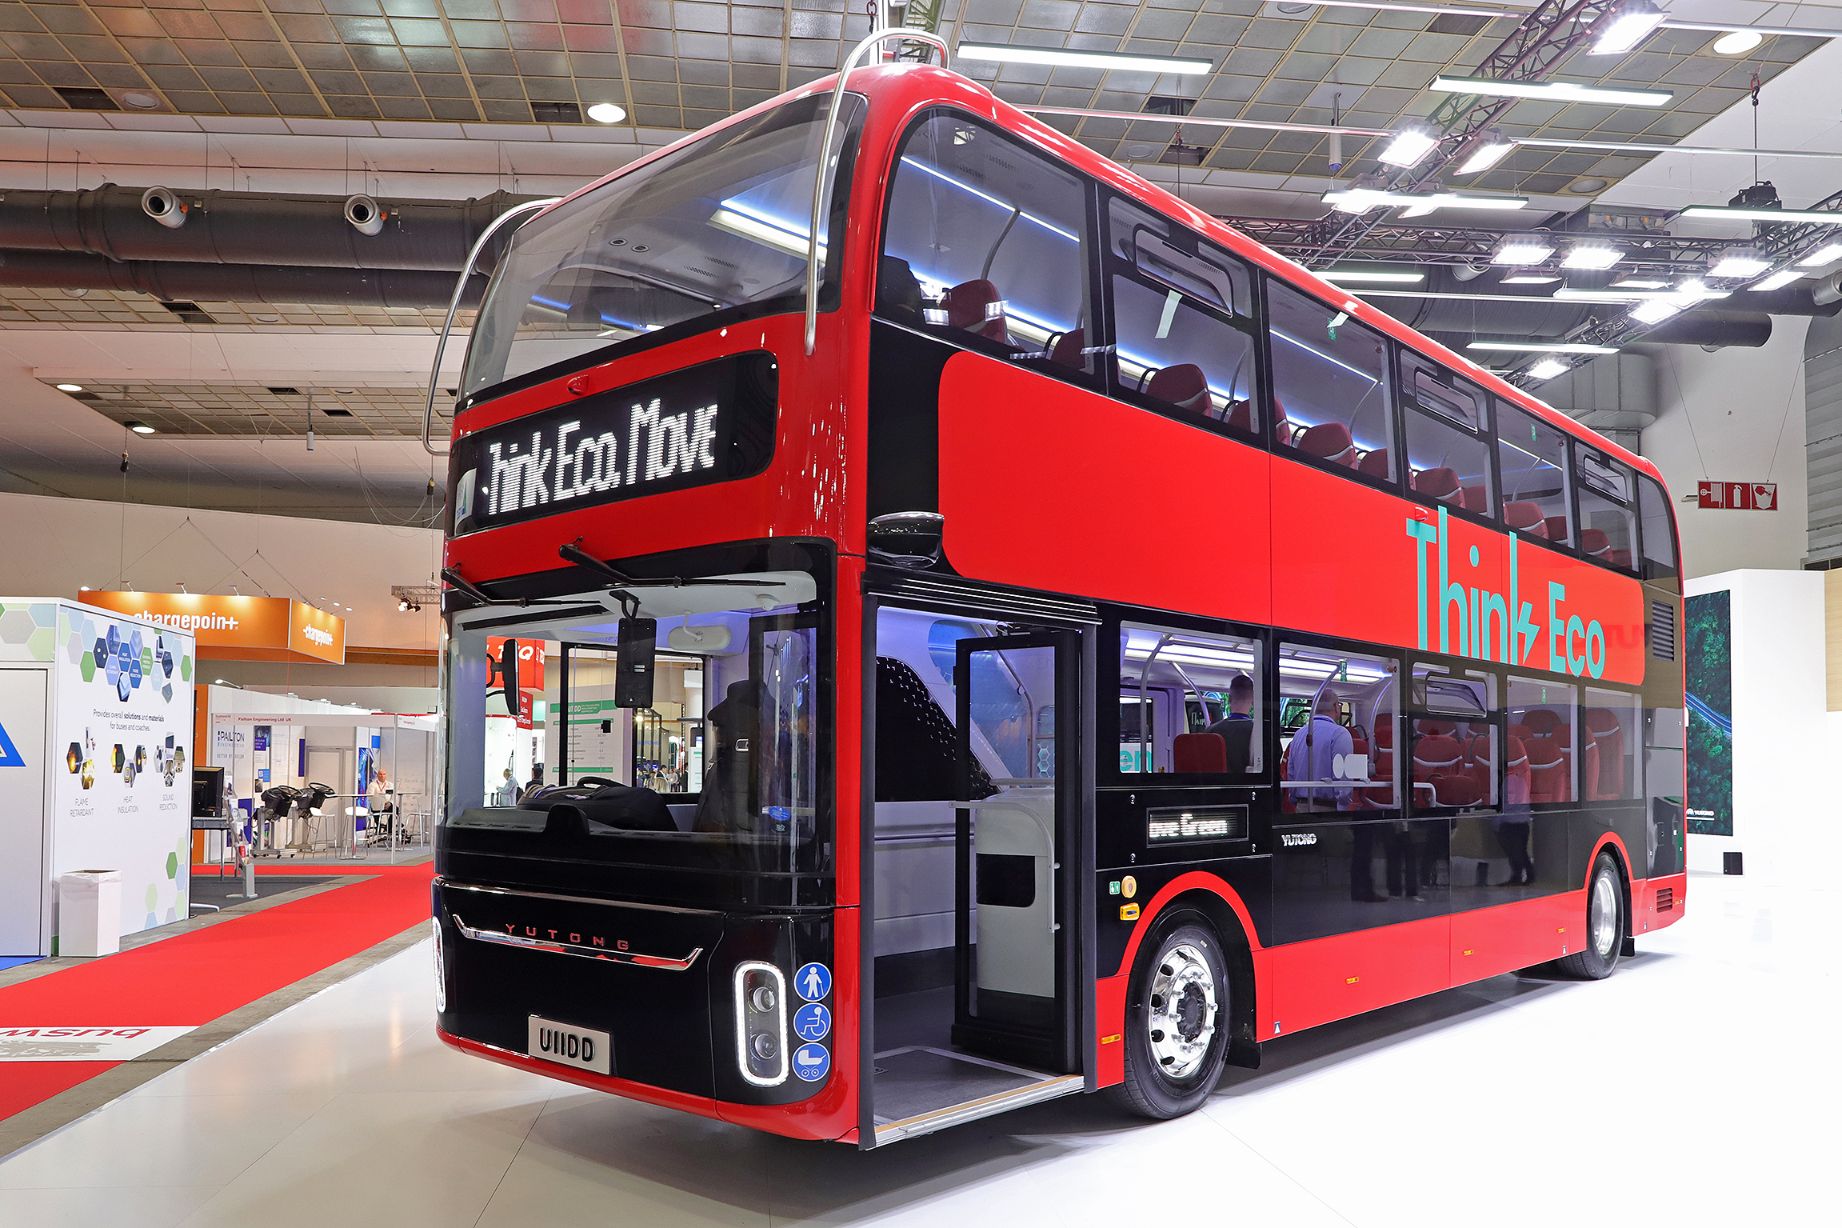 Ikarus has some news in sight, including e-bus chassis and articulated model